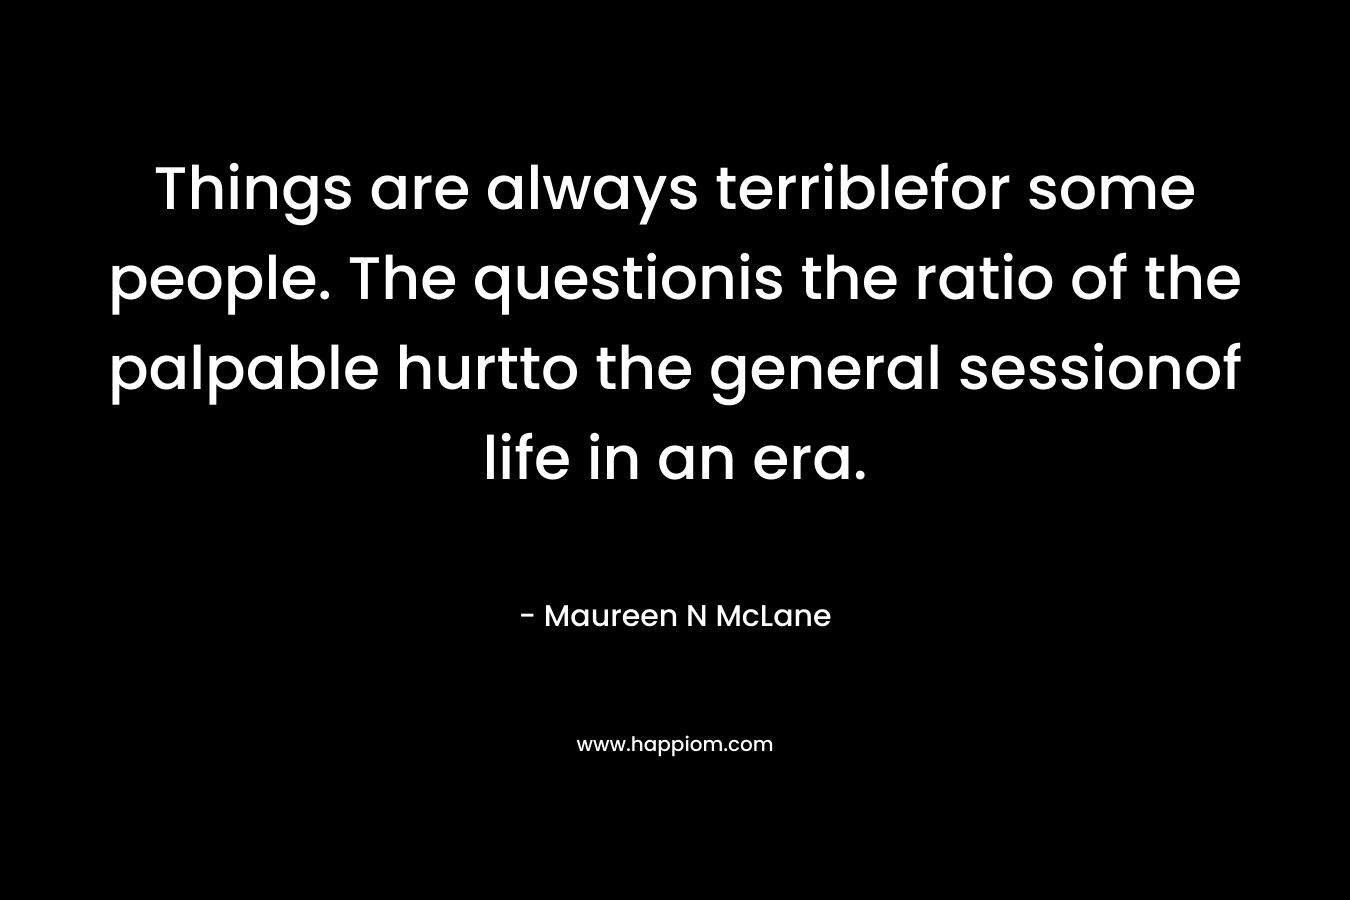 Things are always terriblefor some people. The questionis the ratio of the palpable hurtto the general sessionof life in an era.